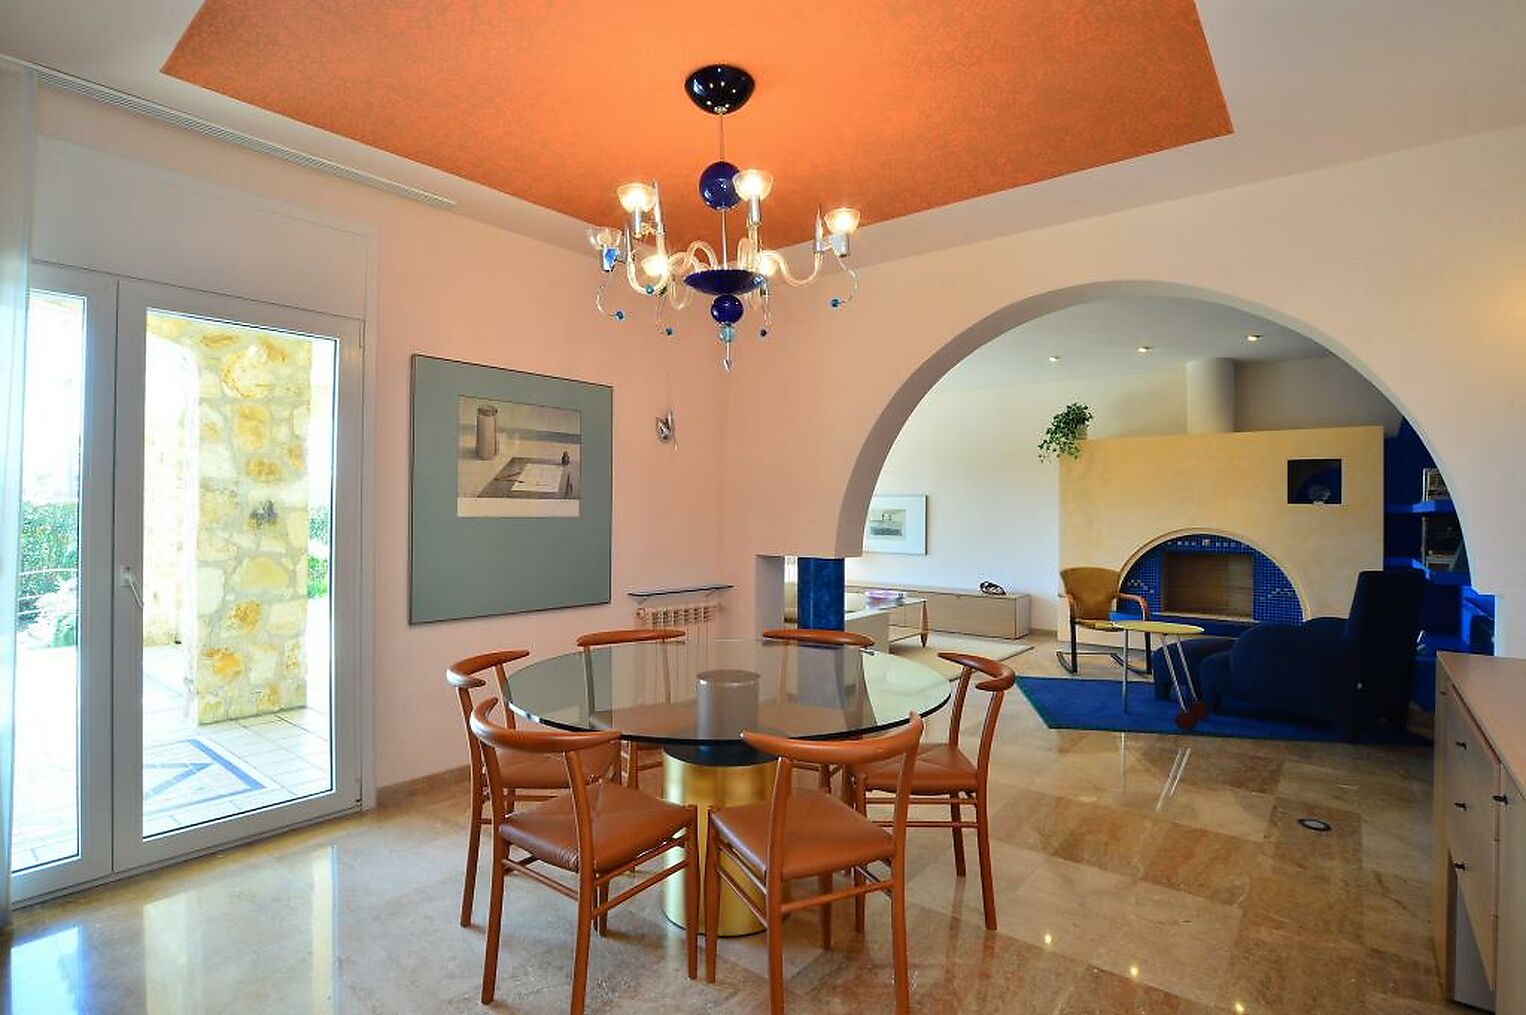 Beautiful 3 bedroom Villa in the center of Platja d'Aro with lovely views.